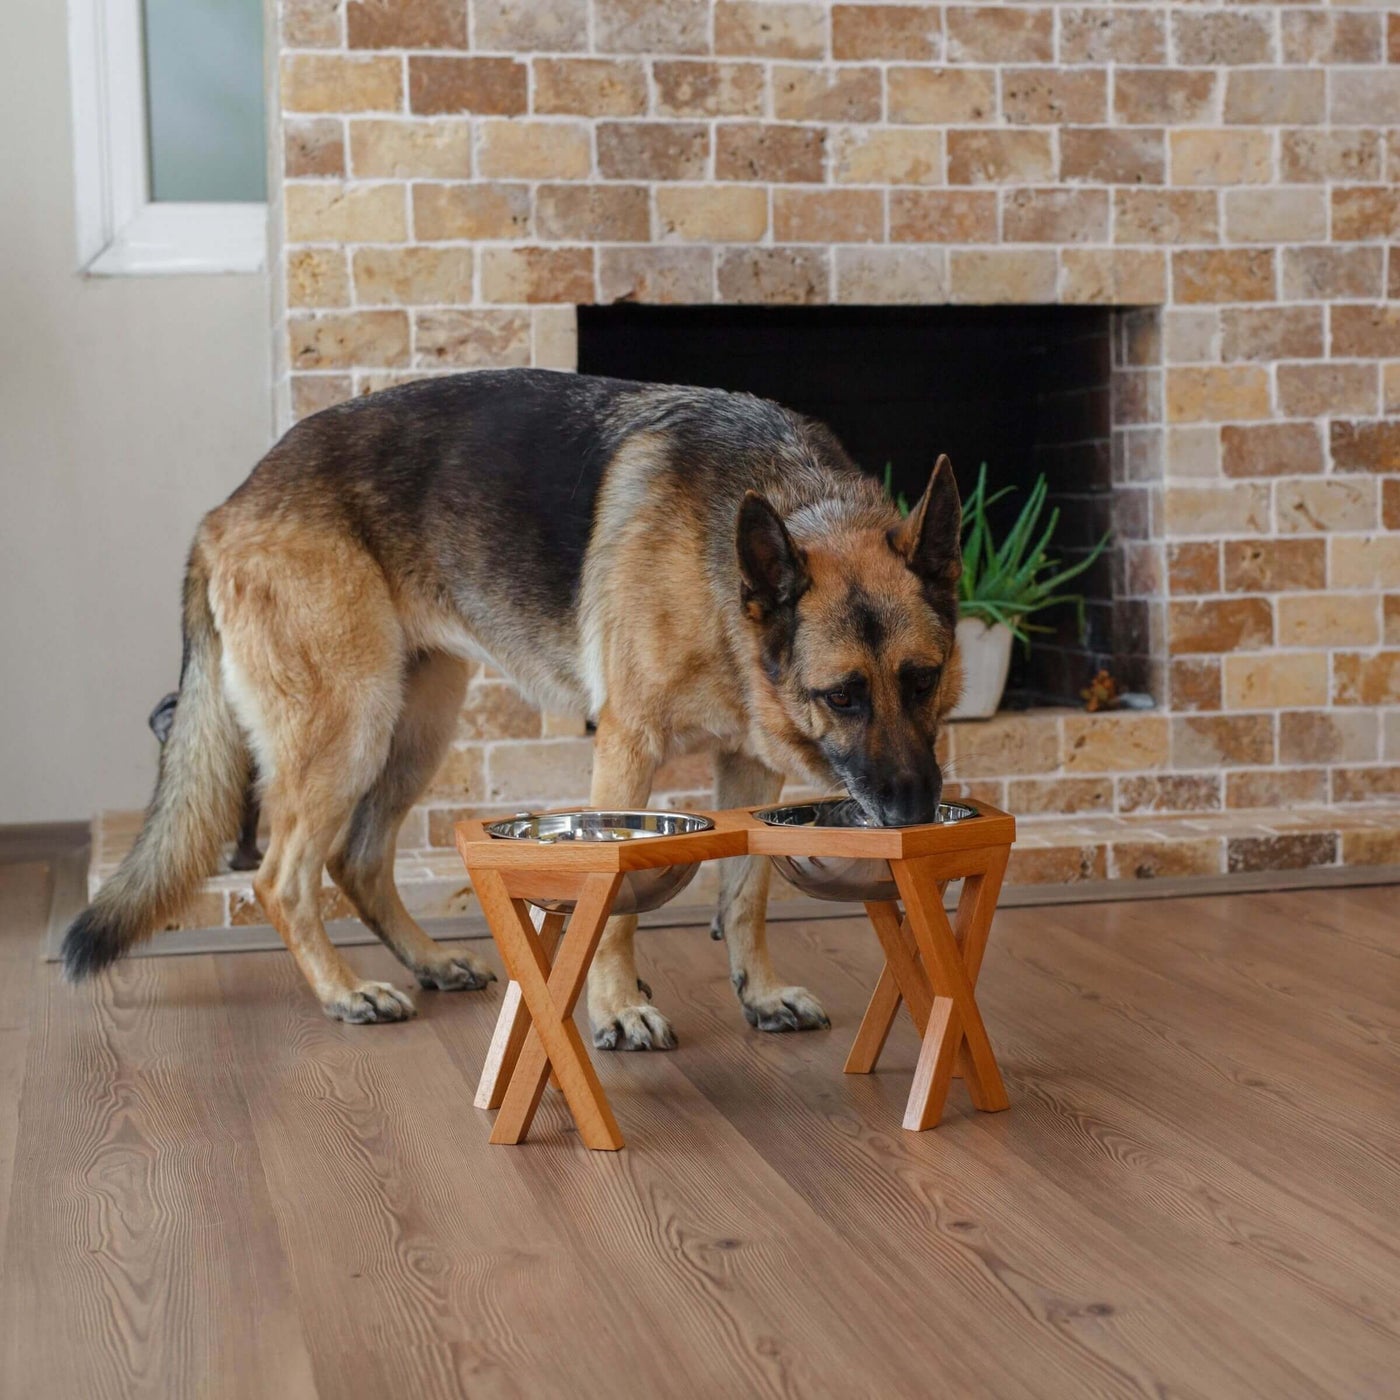 Provide a new elevated of comfort with wooden dog bowl stand